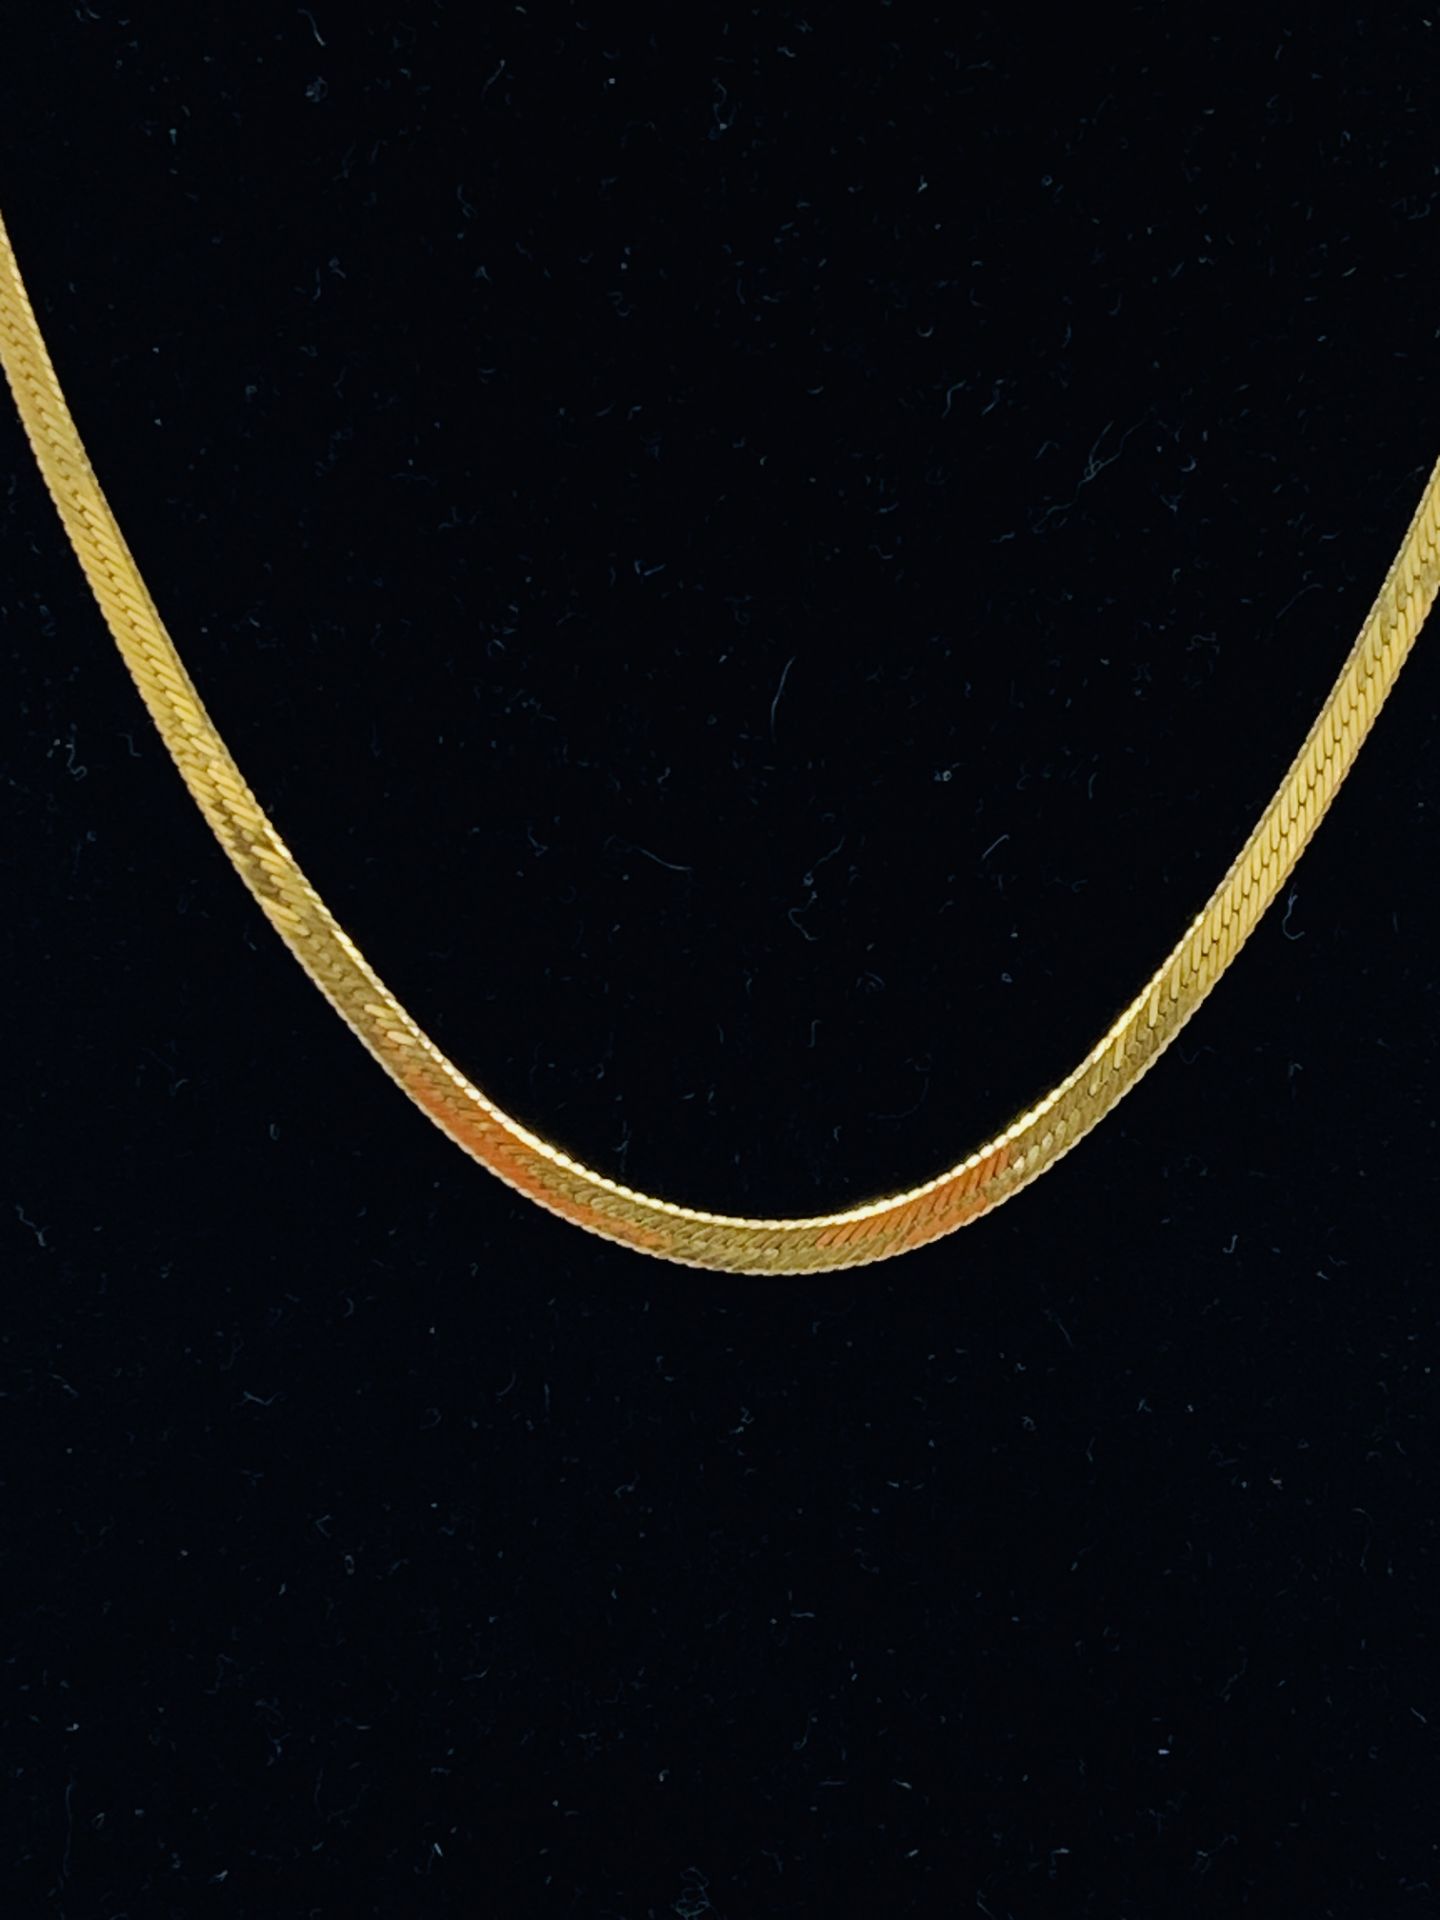 9ct gold necklace - Image 2 of 2